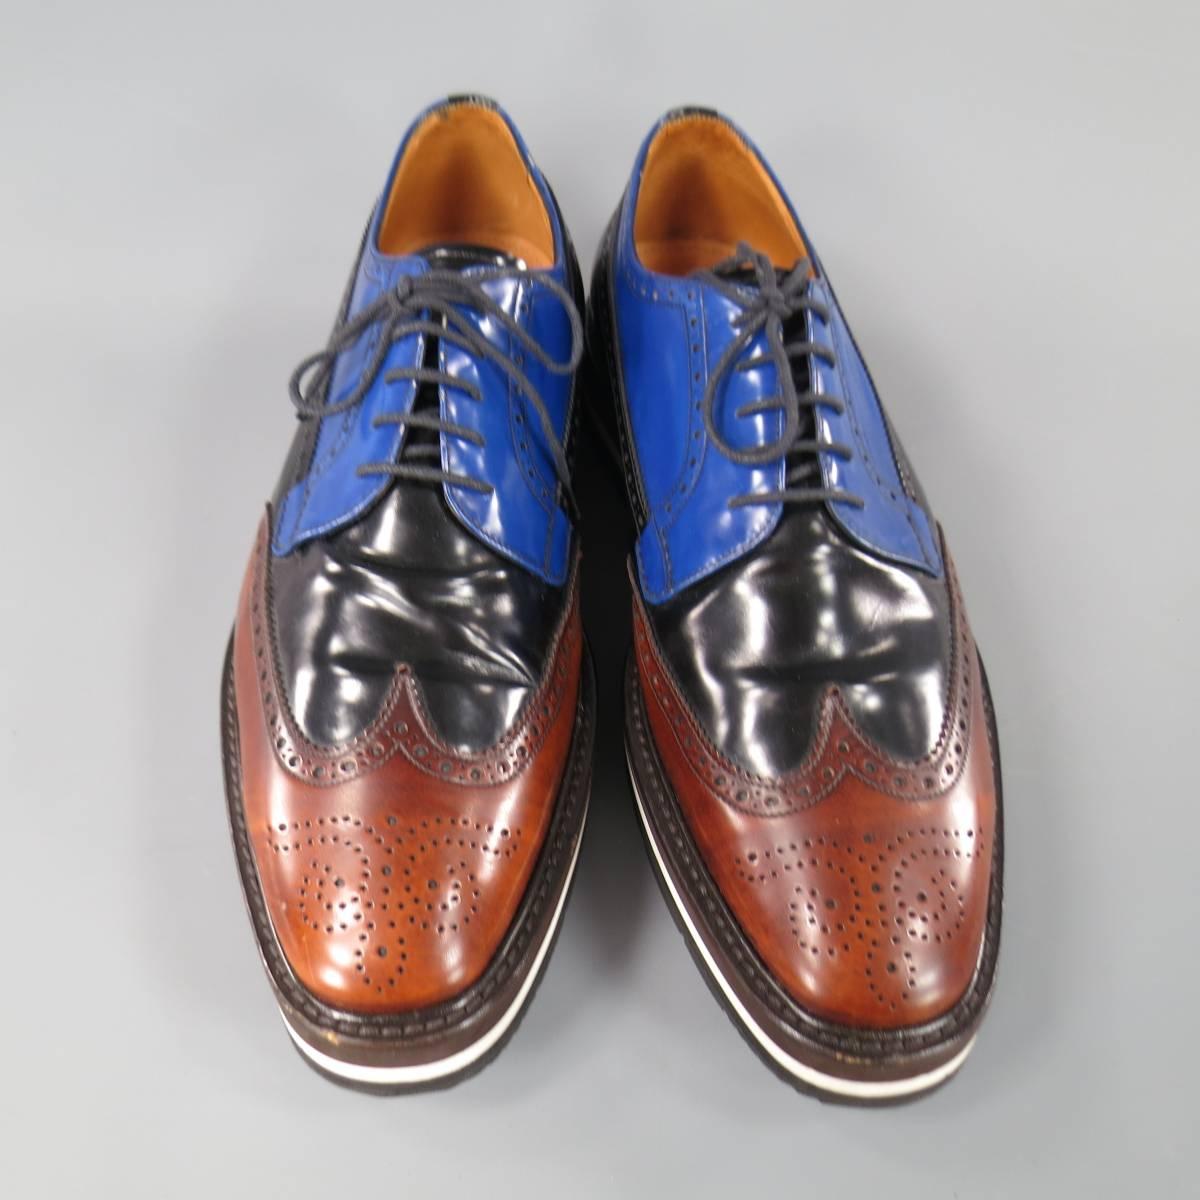 Iconic PRADA Spring 2011 lace up brogues in blue, black, and brown color block leather with wingtip toe, perforated details throughout, and striped platform sole. Made in Italy. Retails at $1150.00.

Excellent Pre-Owned Condition.
Marked: 10.5
